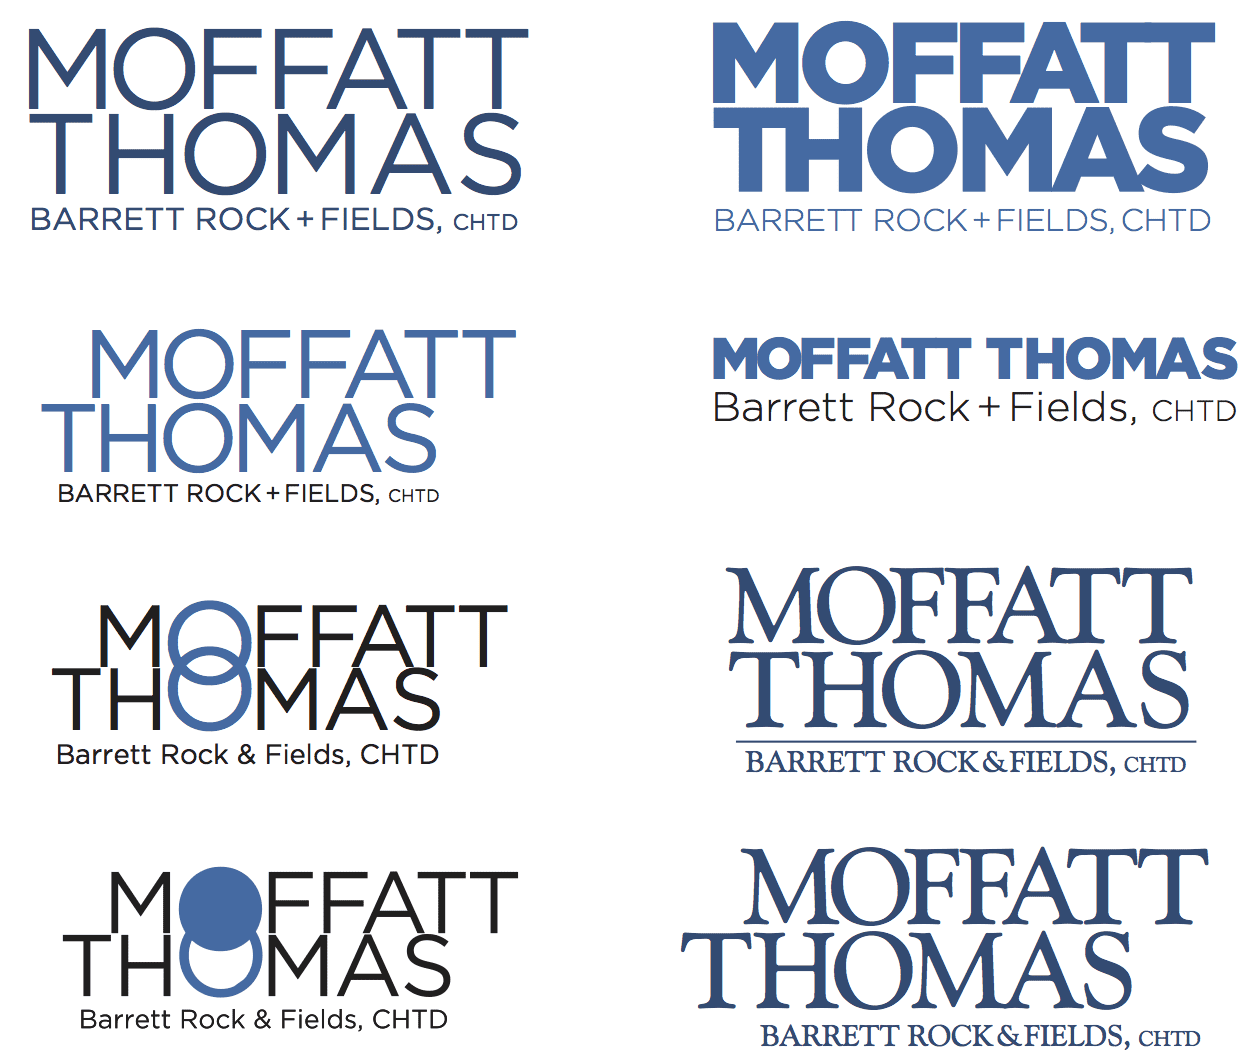 “How hard can it be to design a law firm’s logo?”